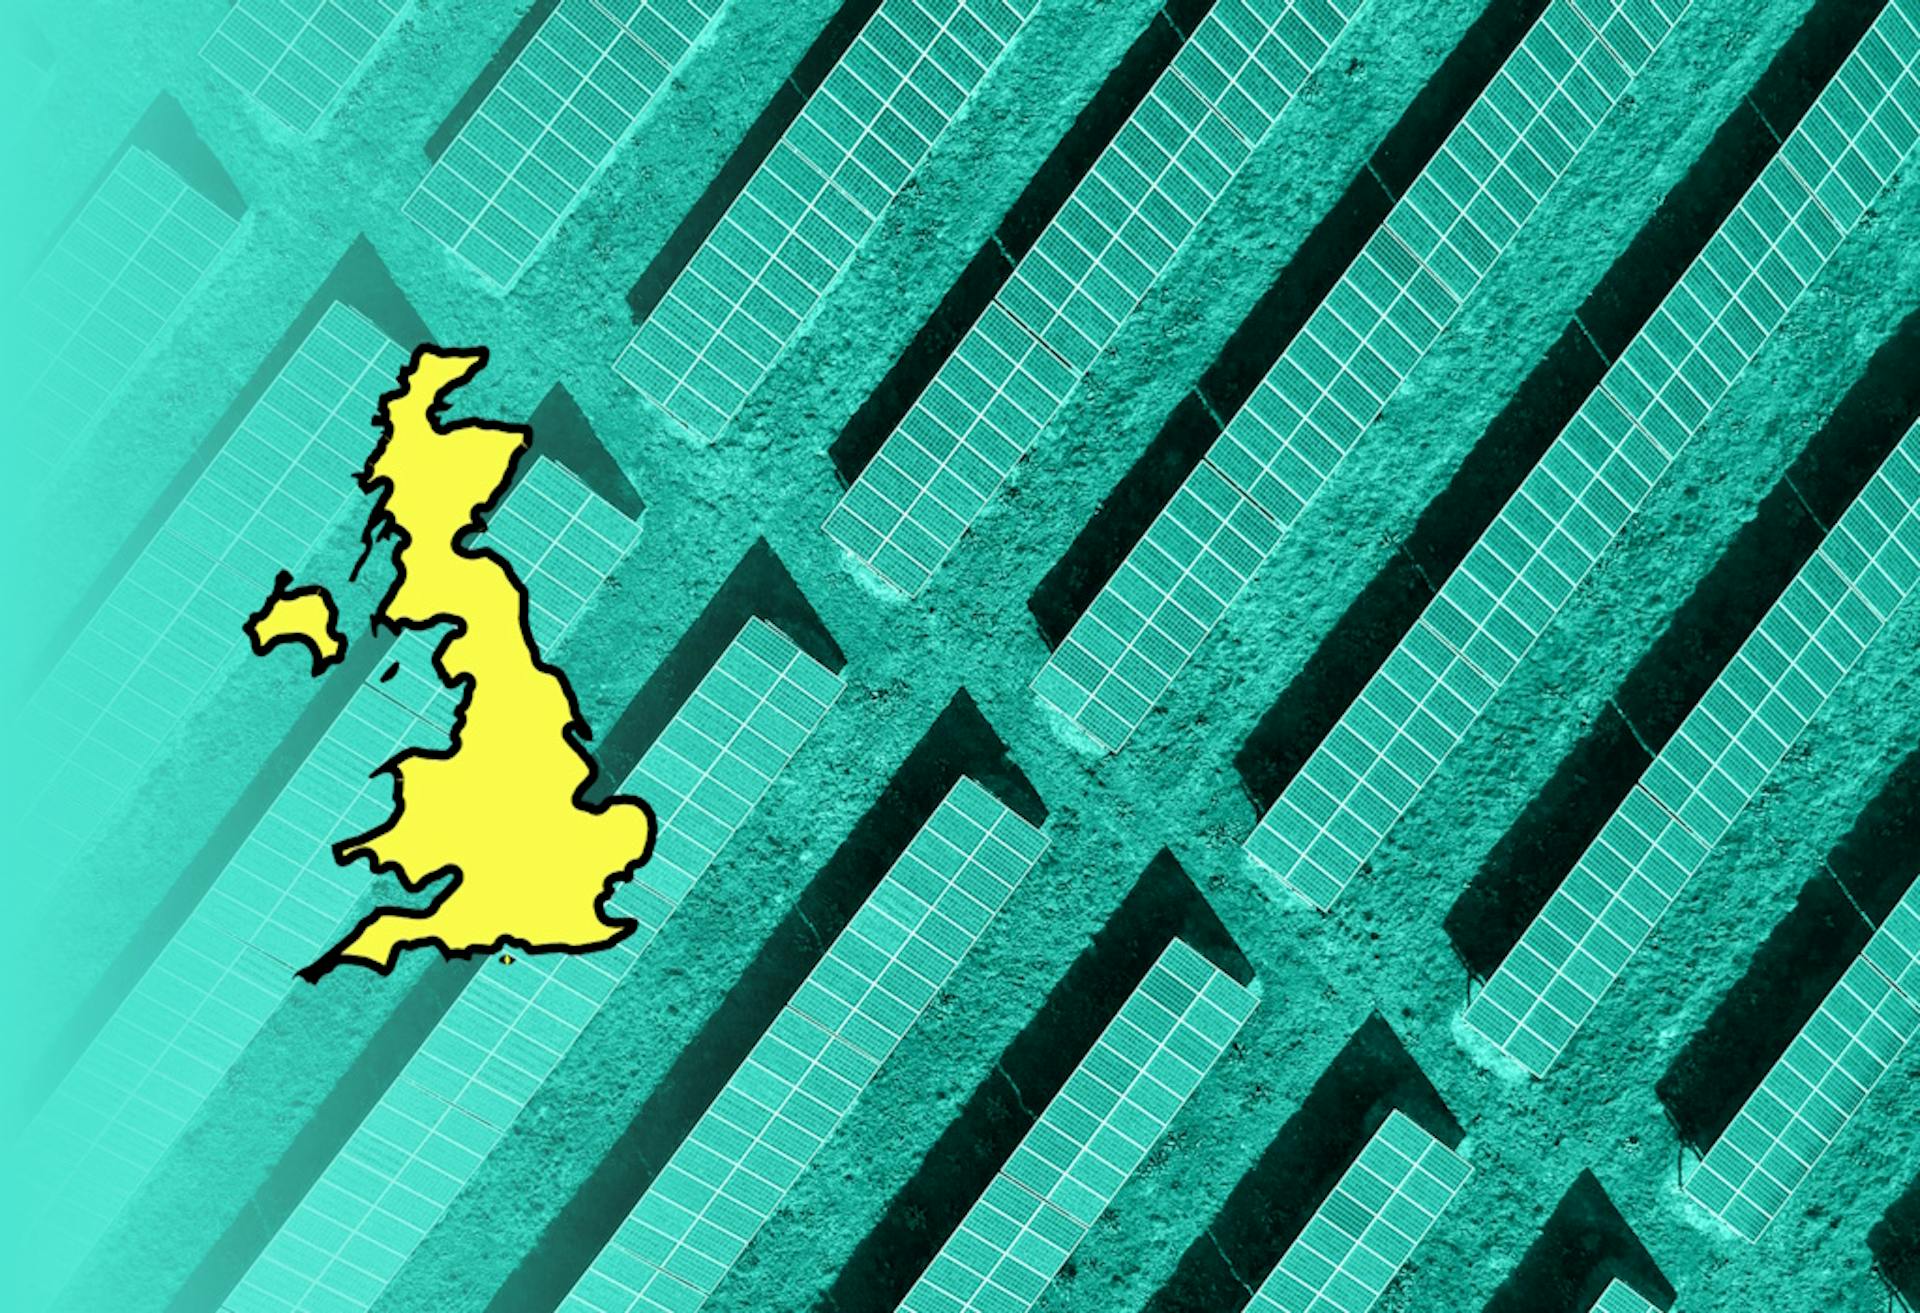 A yellow graphic of a map of the UK, outlined in black, set against a bird's-eye view of solar panels lined up on grass, coloured in aquamarine